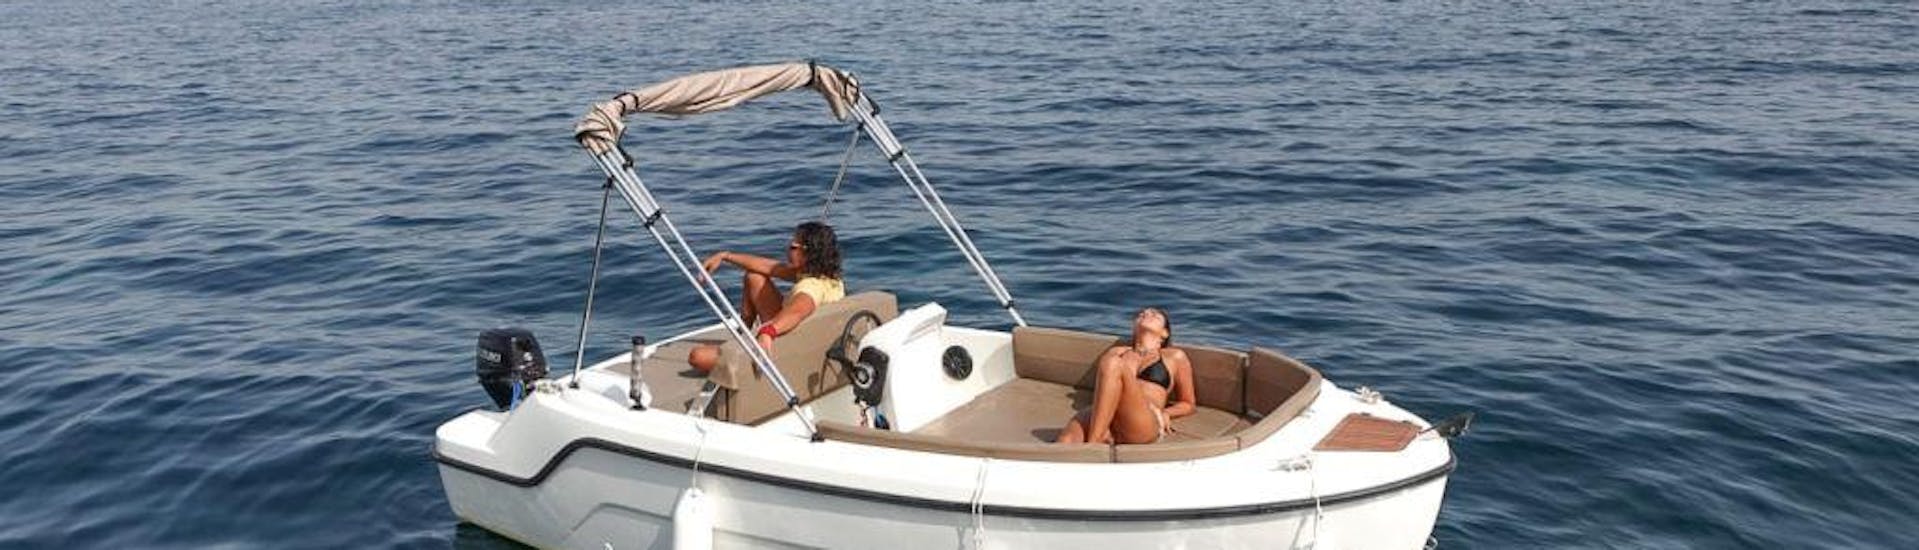 Boat Rental in Pollença (up to 7 people) with Nautical Experience Pollença.